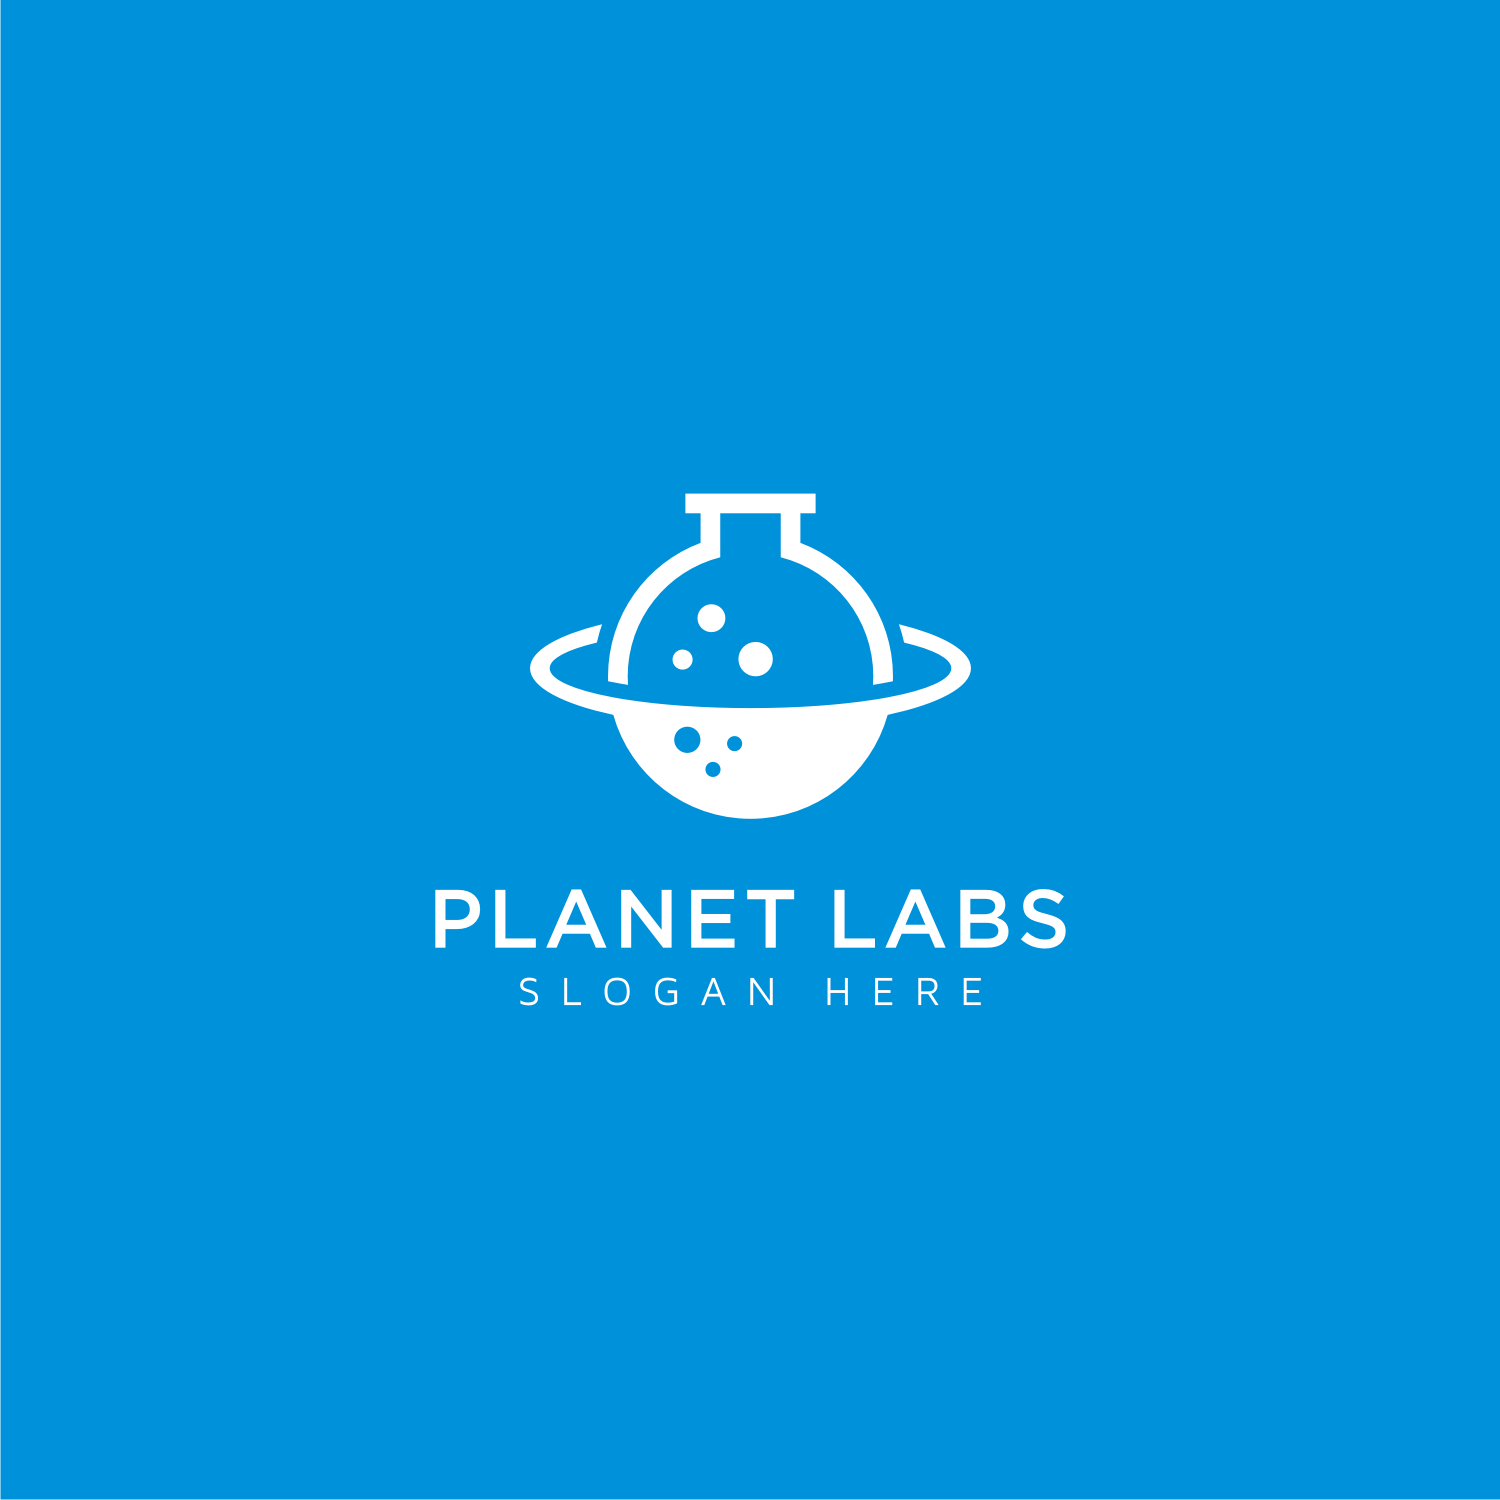 Creative Planet Orbit Labor Lab Abstract Logo Design Preview Image.